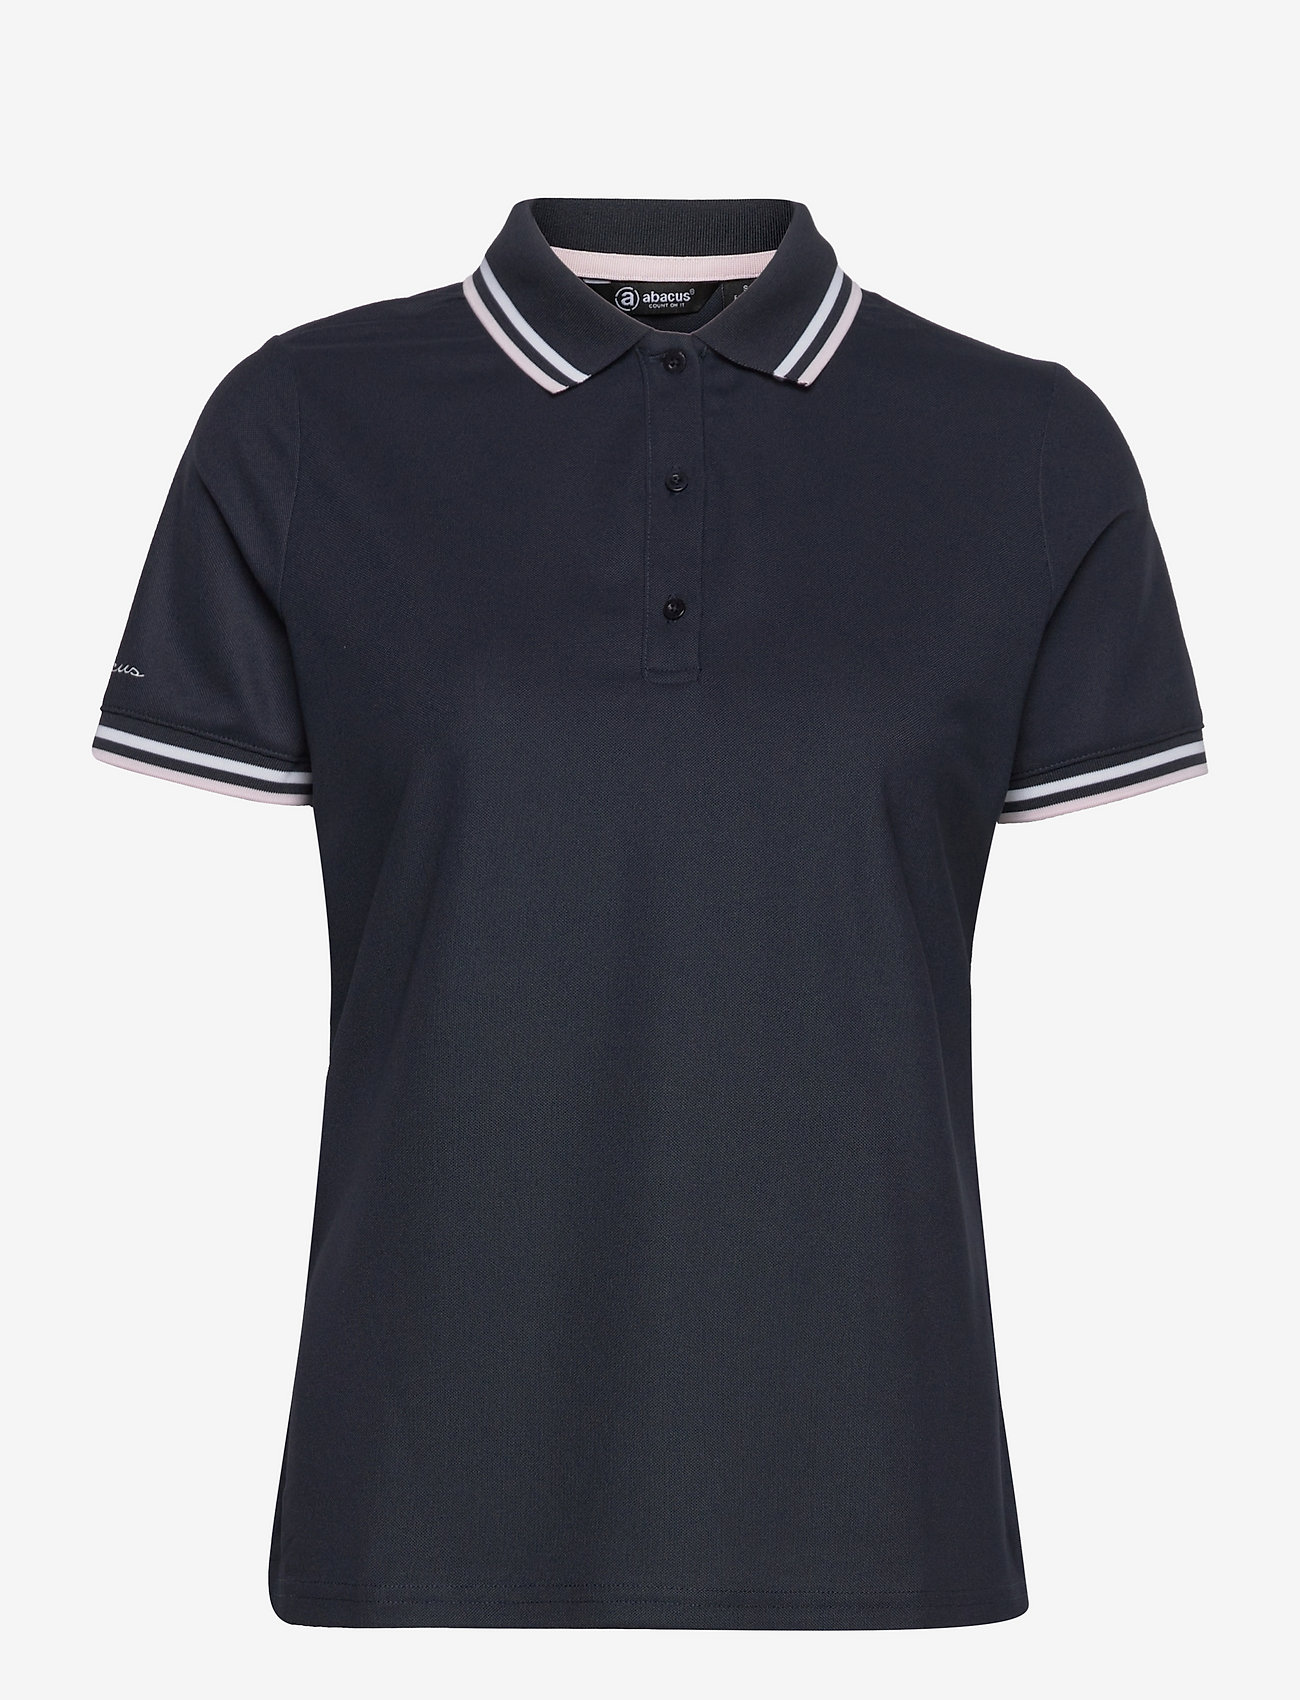 Abacus - Lds Pines polo - polos - navy - 0